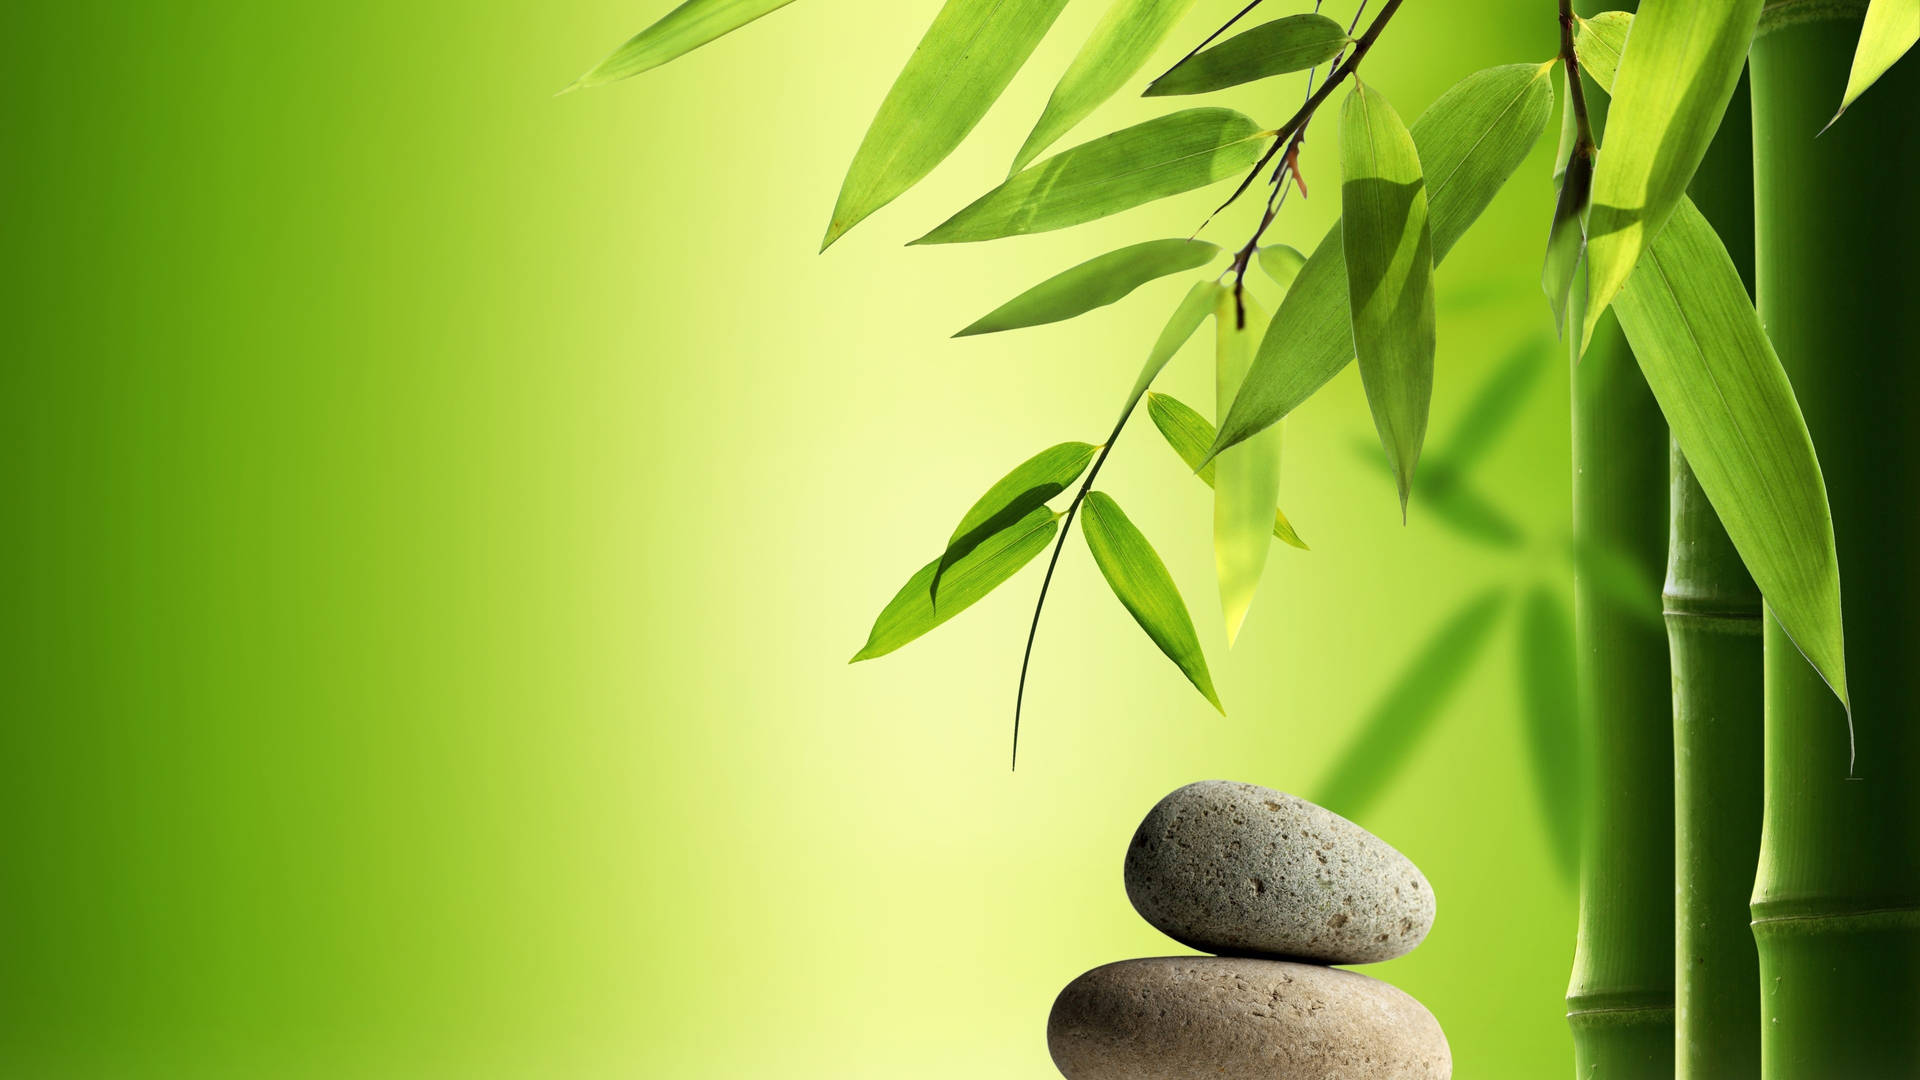 Bamboo 4k Plant Leaves And Stones